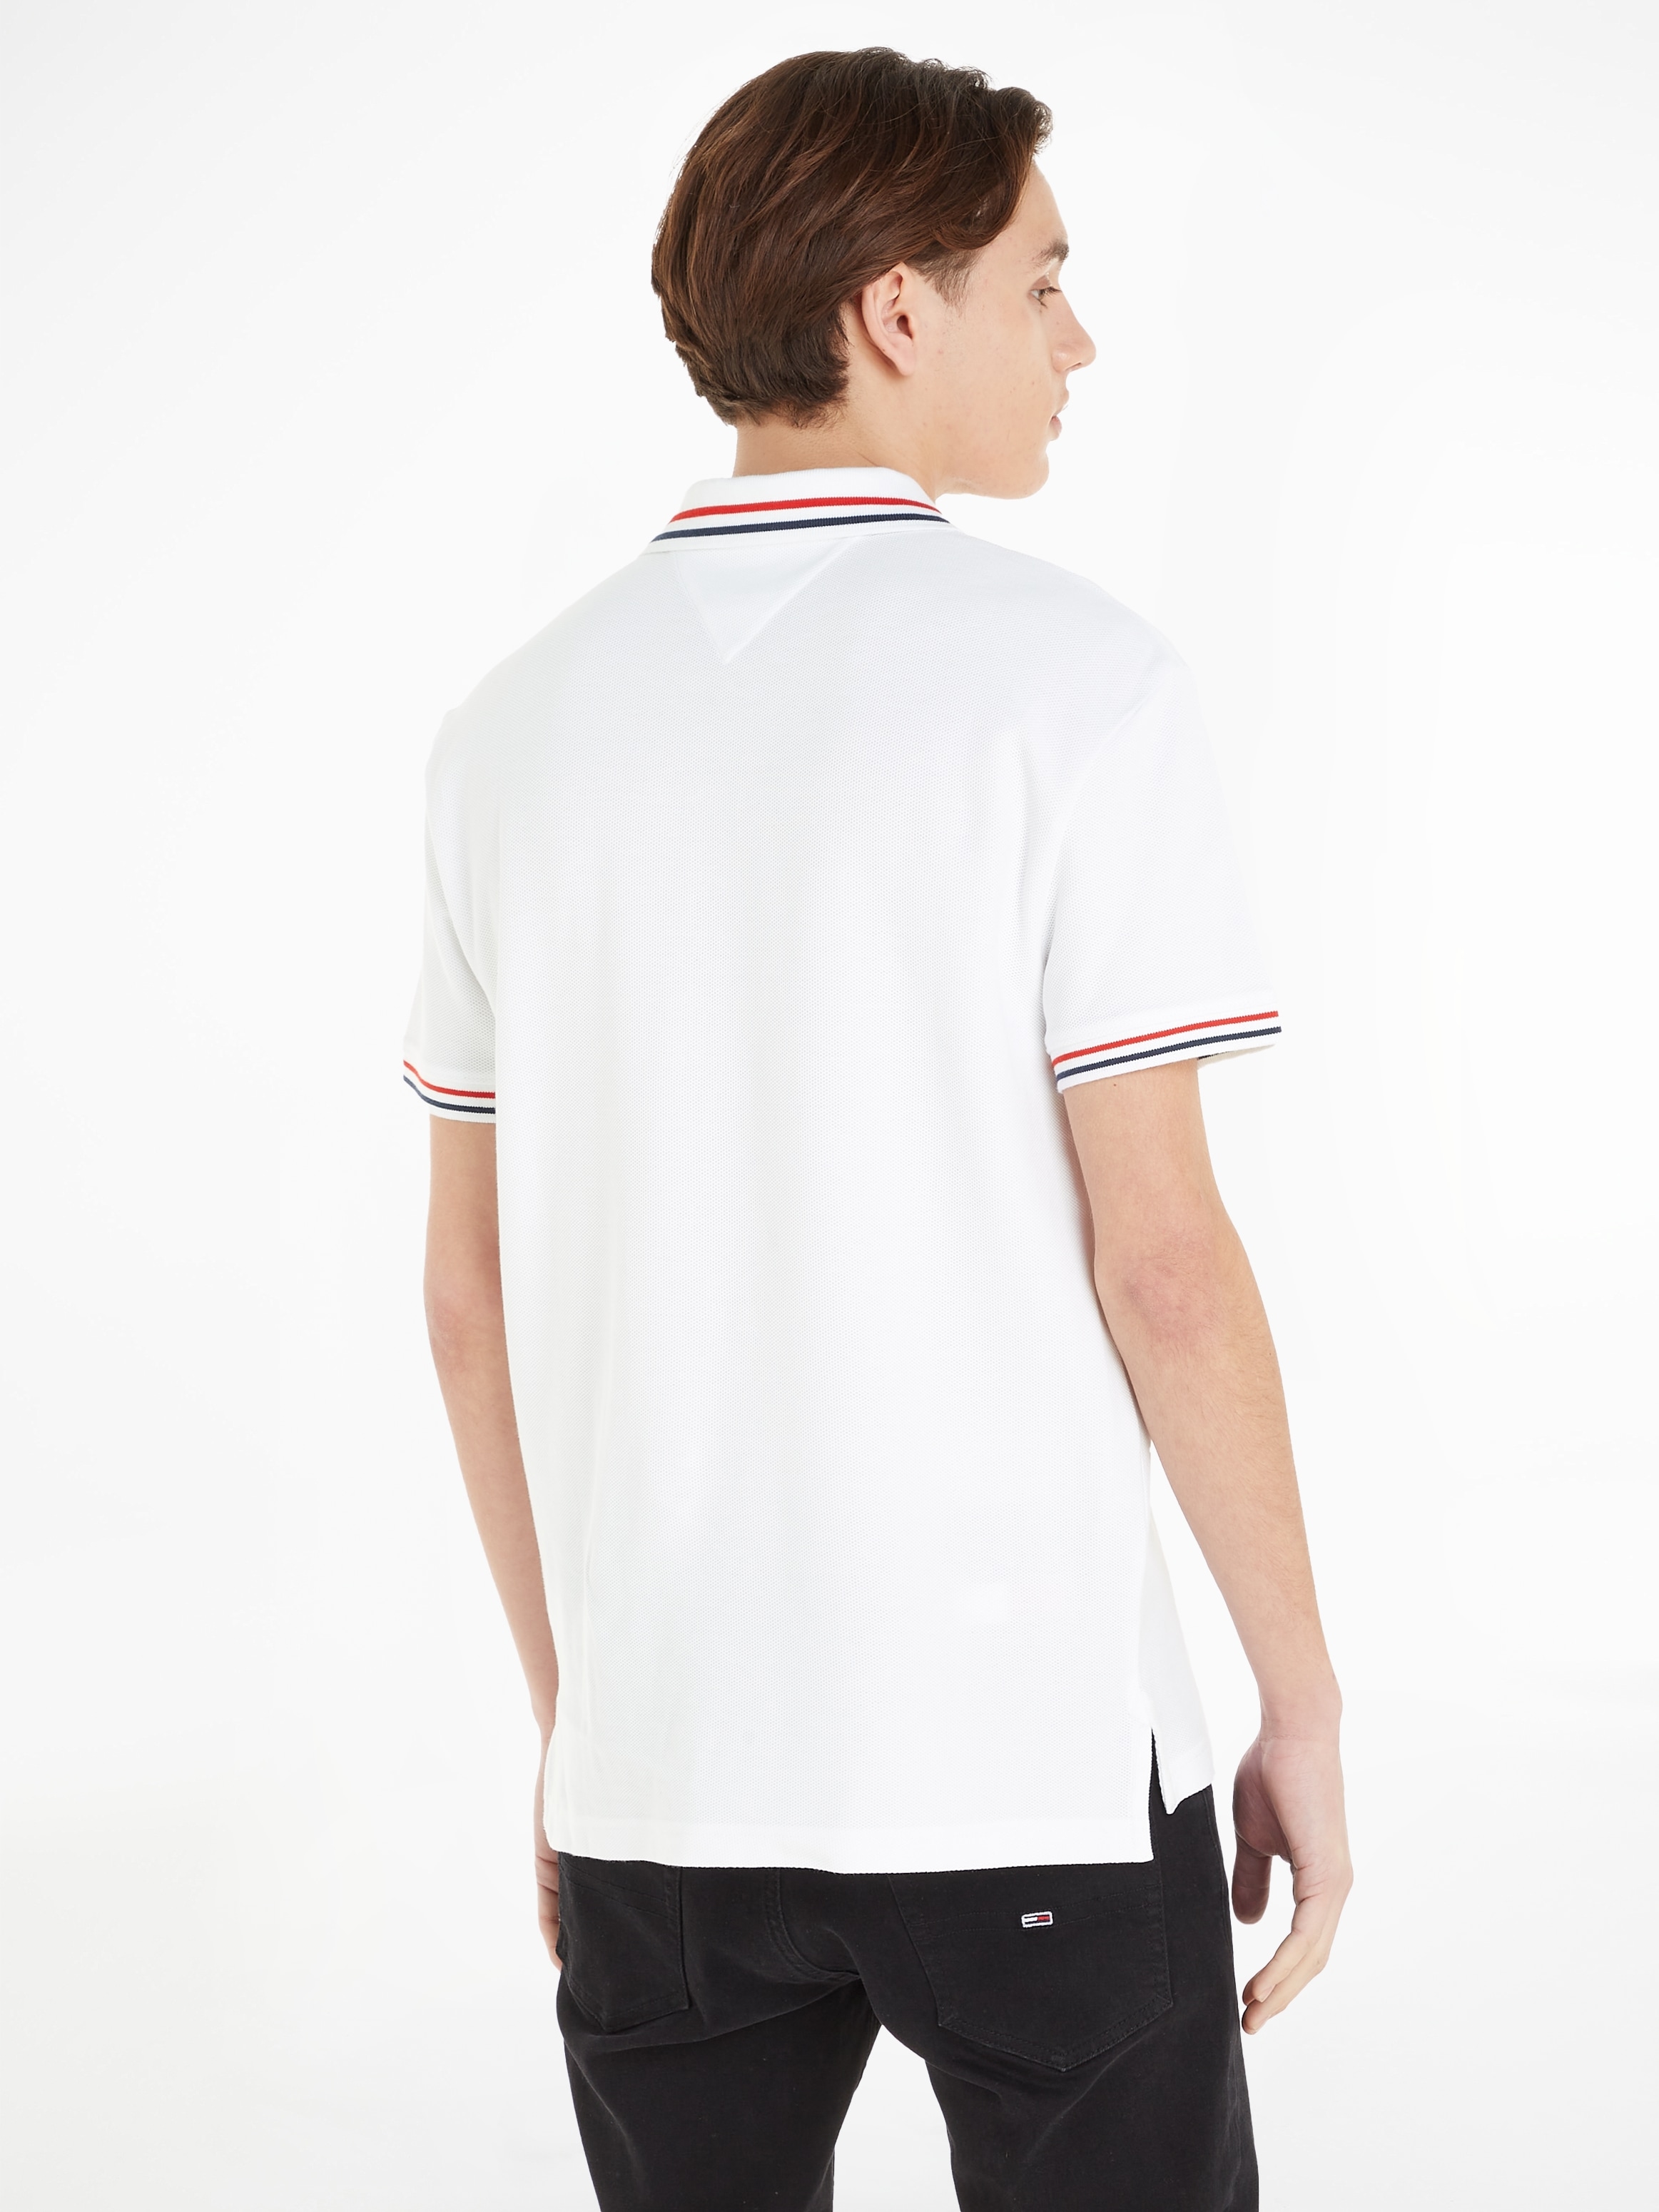 TIPPED Tommy »TJM bei GRAPHIC bestellen POLO« CLSC Jeans OTTO Poloshirt online